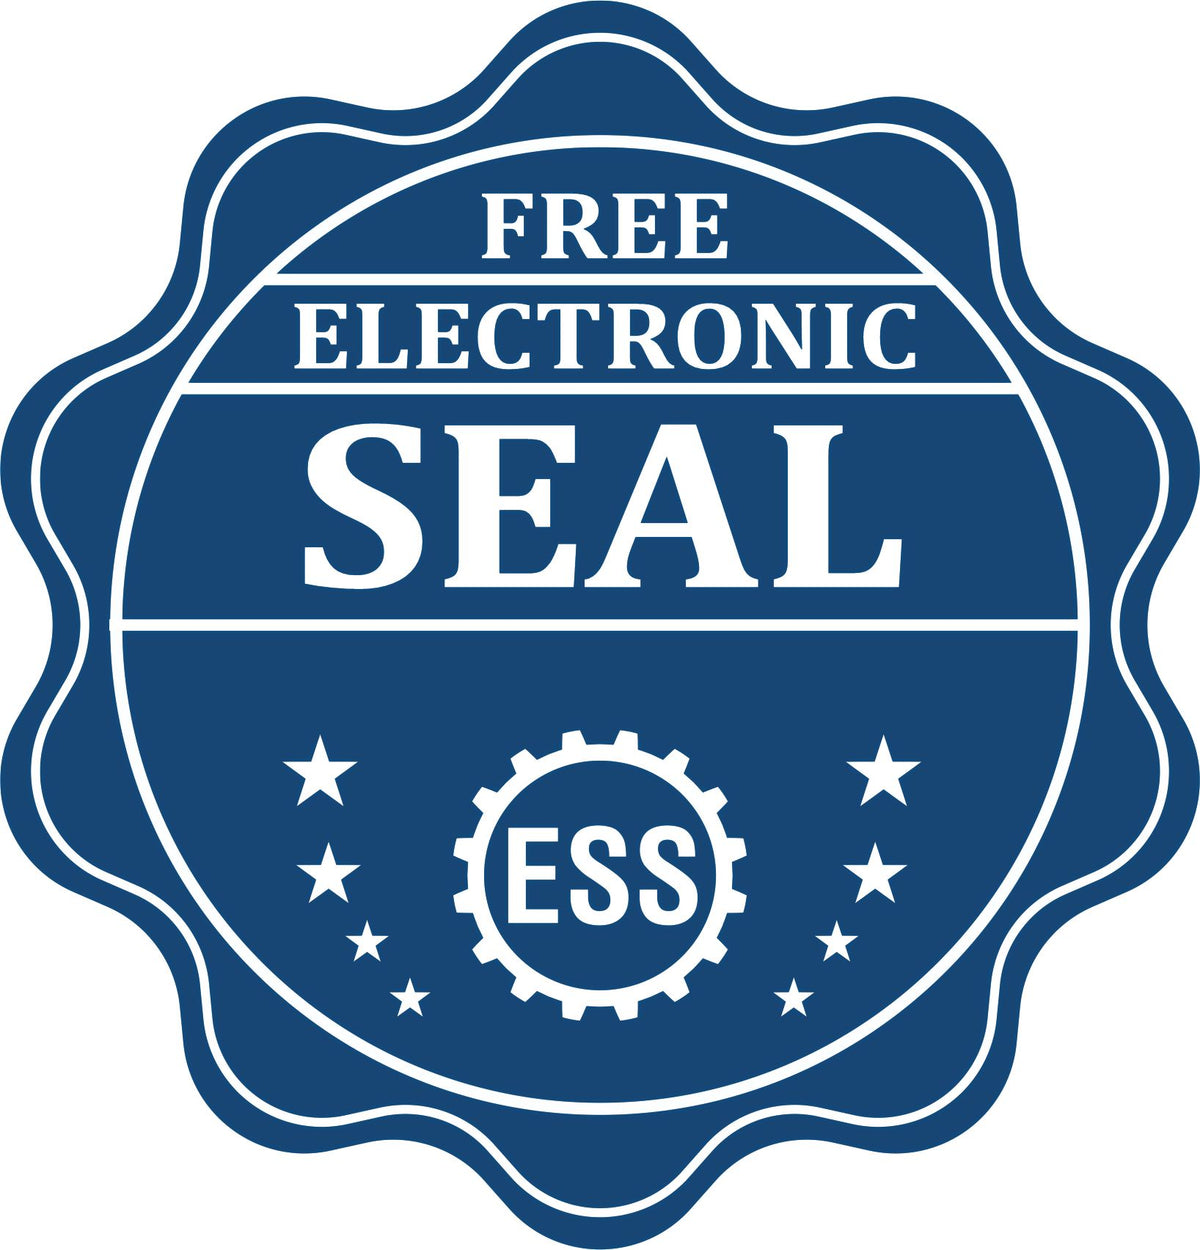 A badge showing a free electronic seal for the Idaho Engineer Desk Seal with stars and the ESS gear on the emblem.